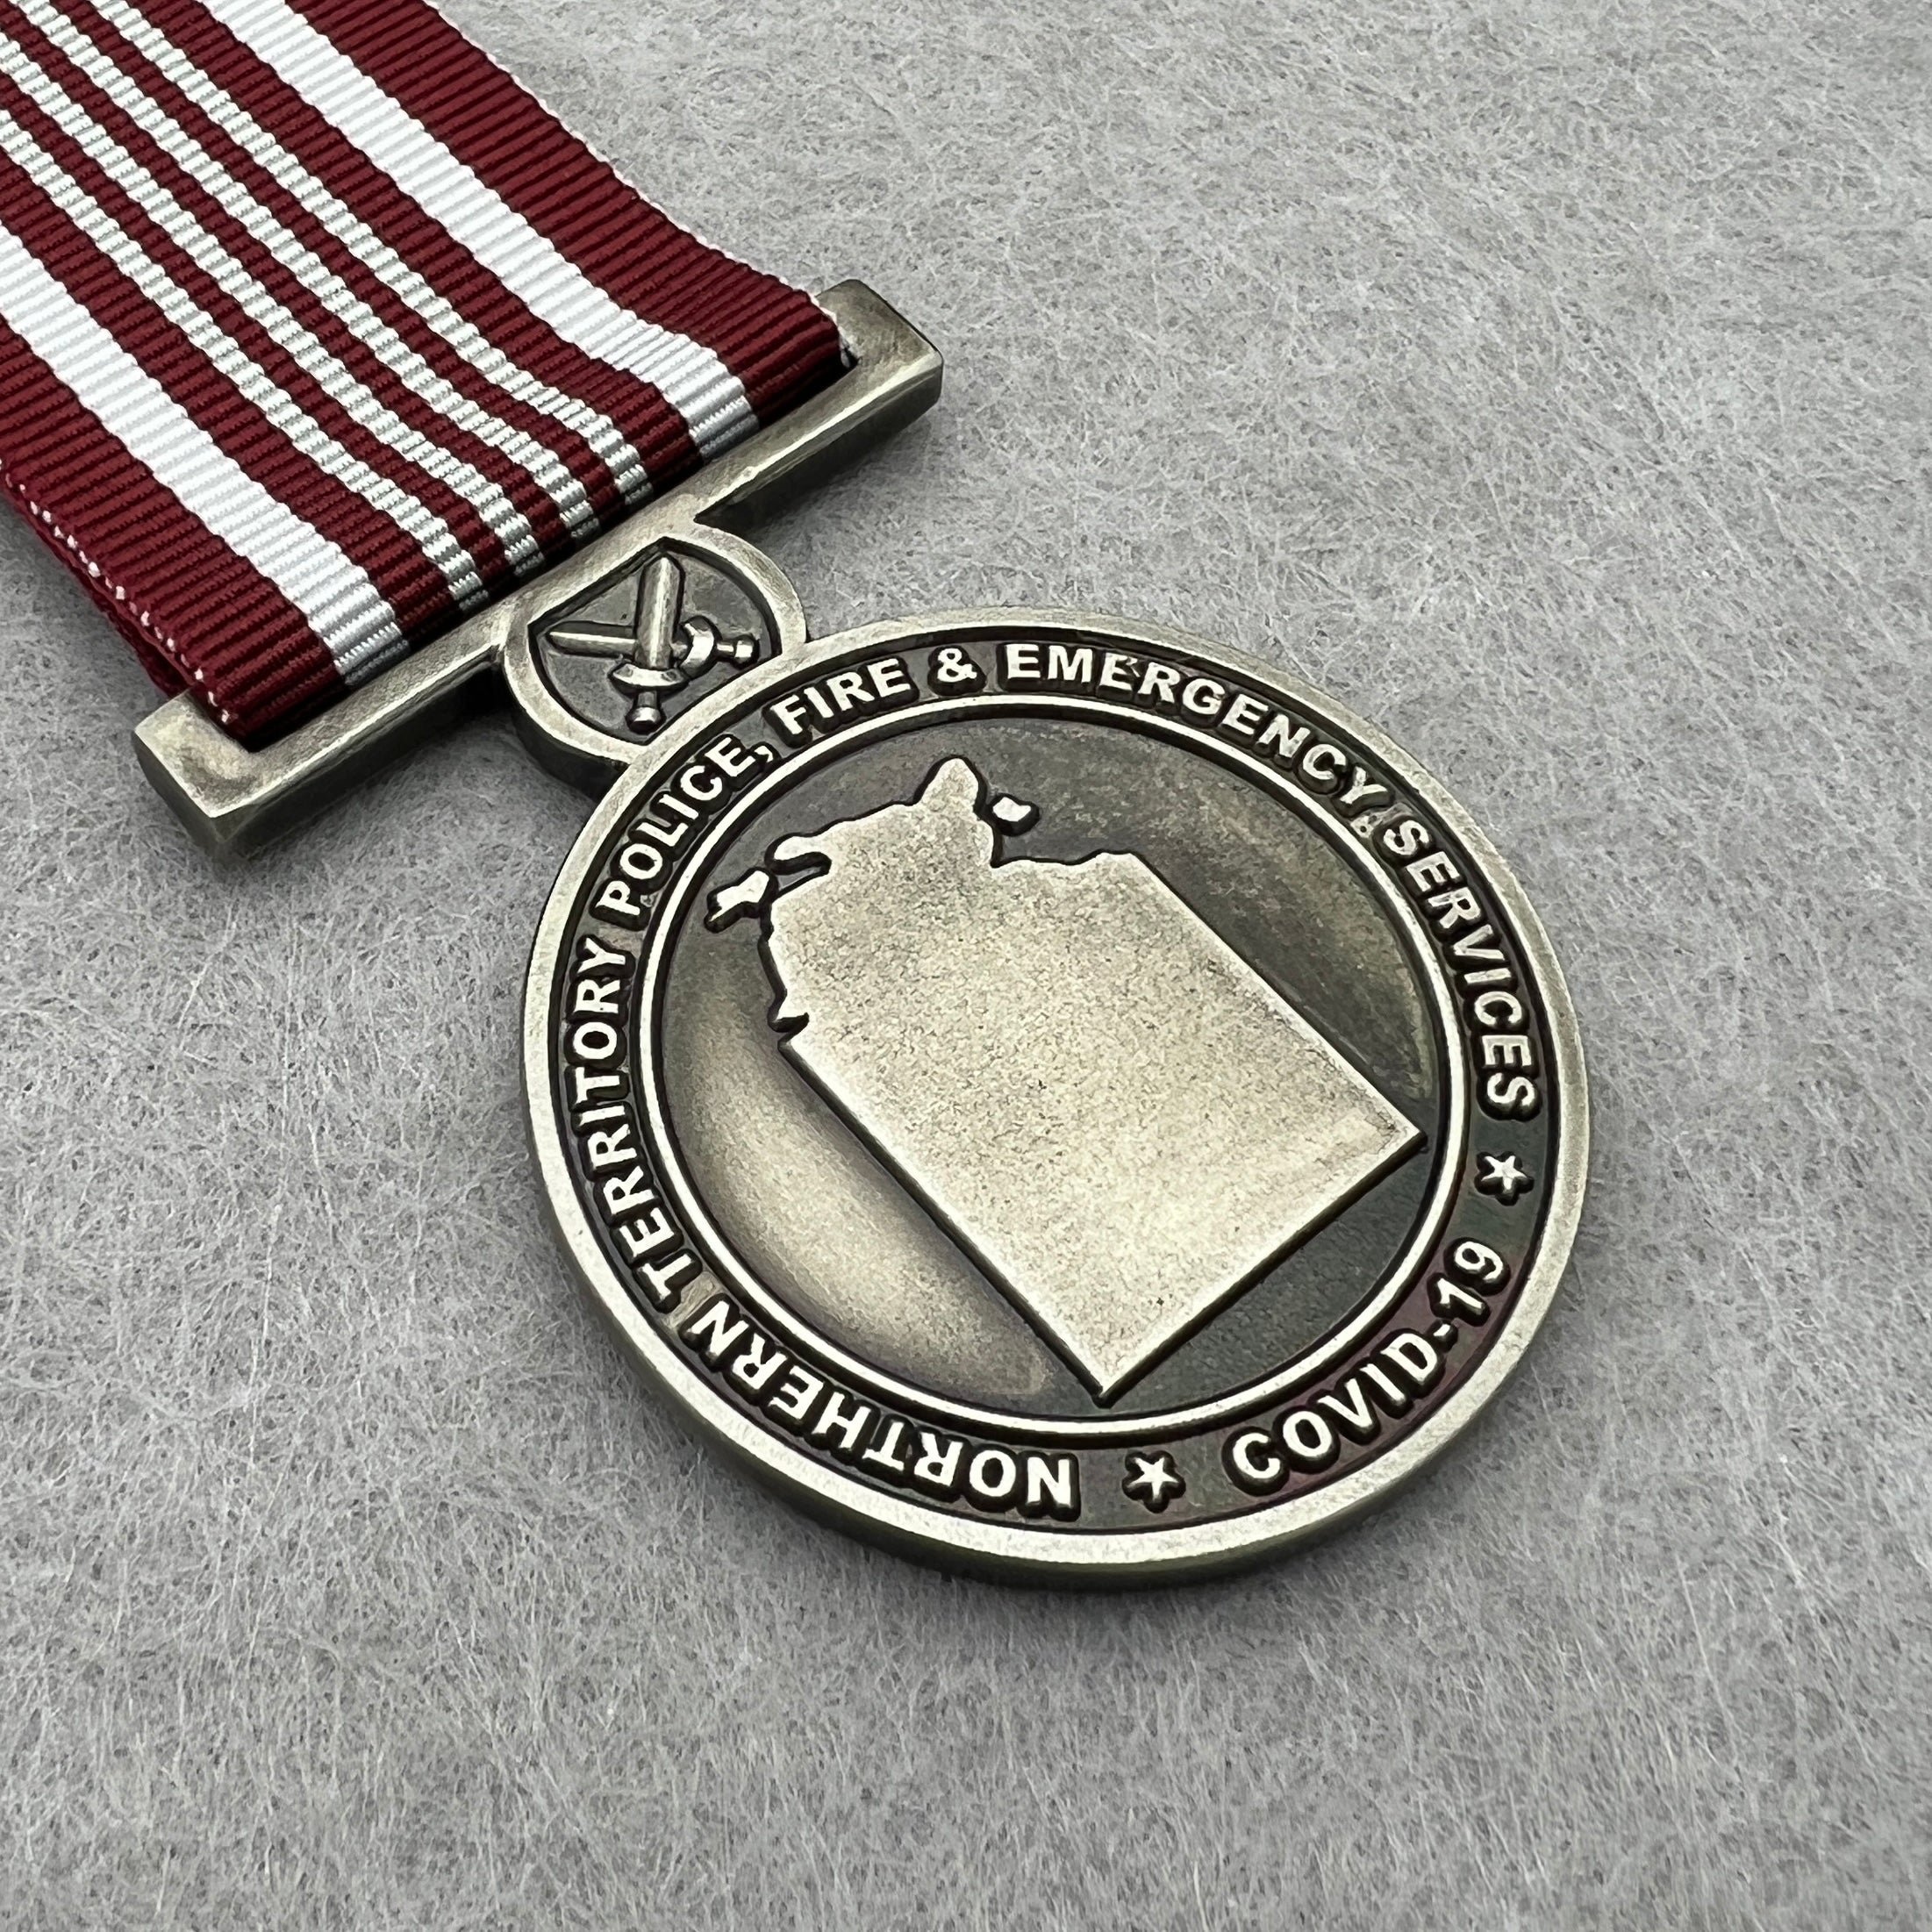 NT Police, Fire & Emergency Services COVID-19 Service Medal - Foxhole Medals